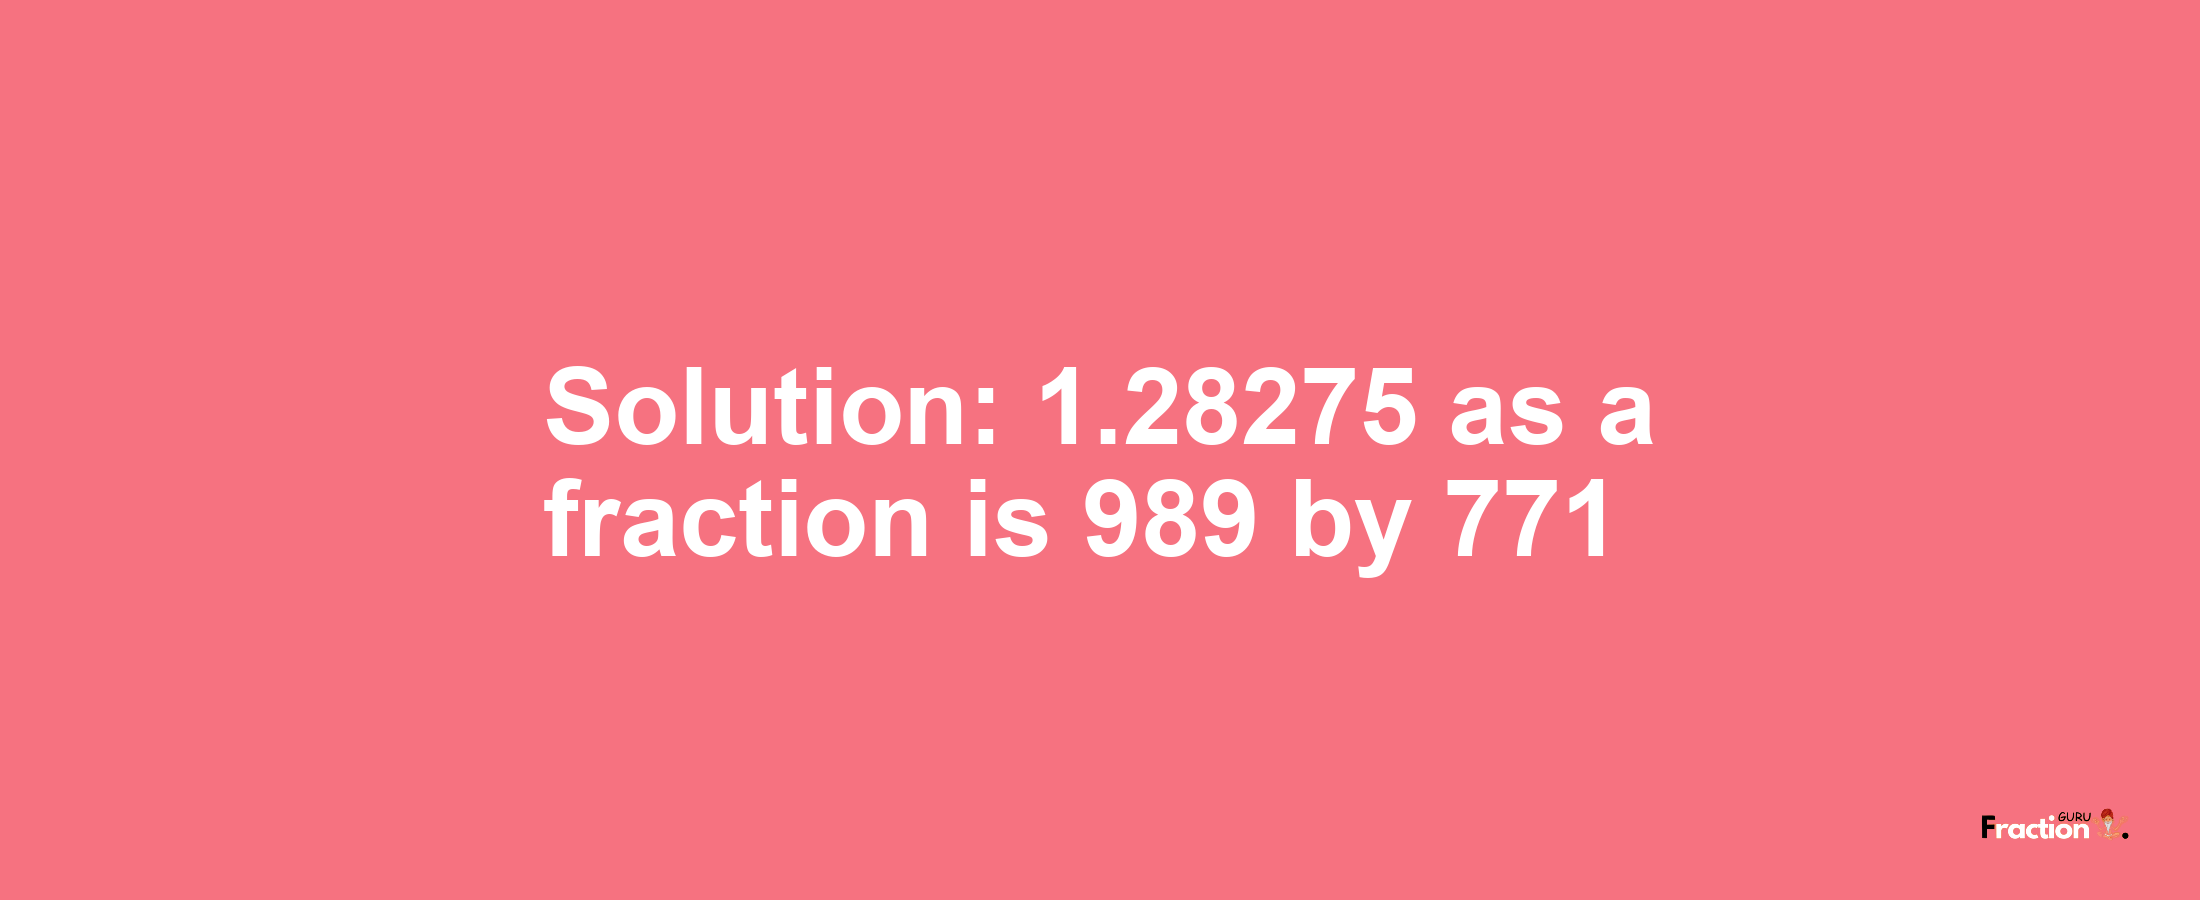 Solution:1.28275 as a fraction is 989/771